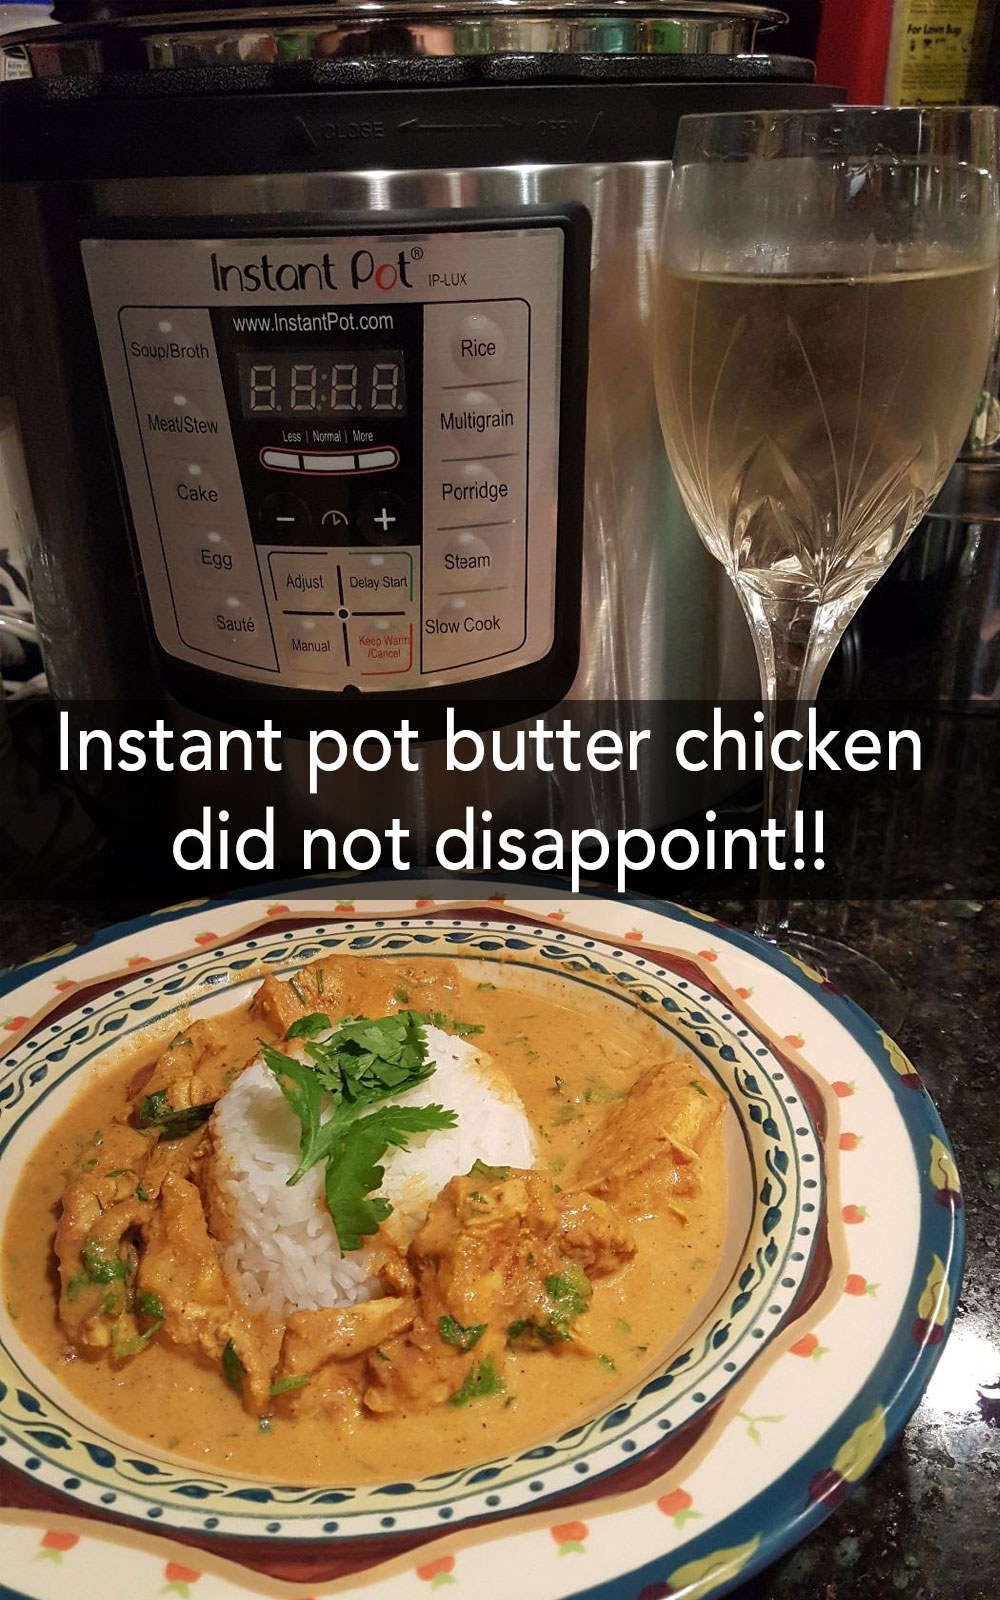 A reviewer&#x27;s instant pot and the dinner they made with text &quot;instant pot butter chicken did not disappoint&quot;